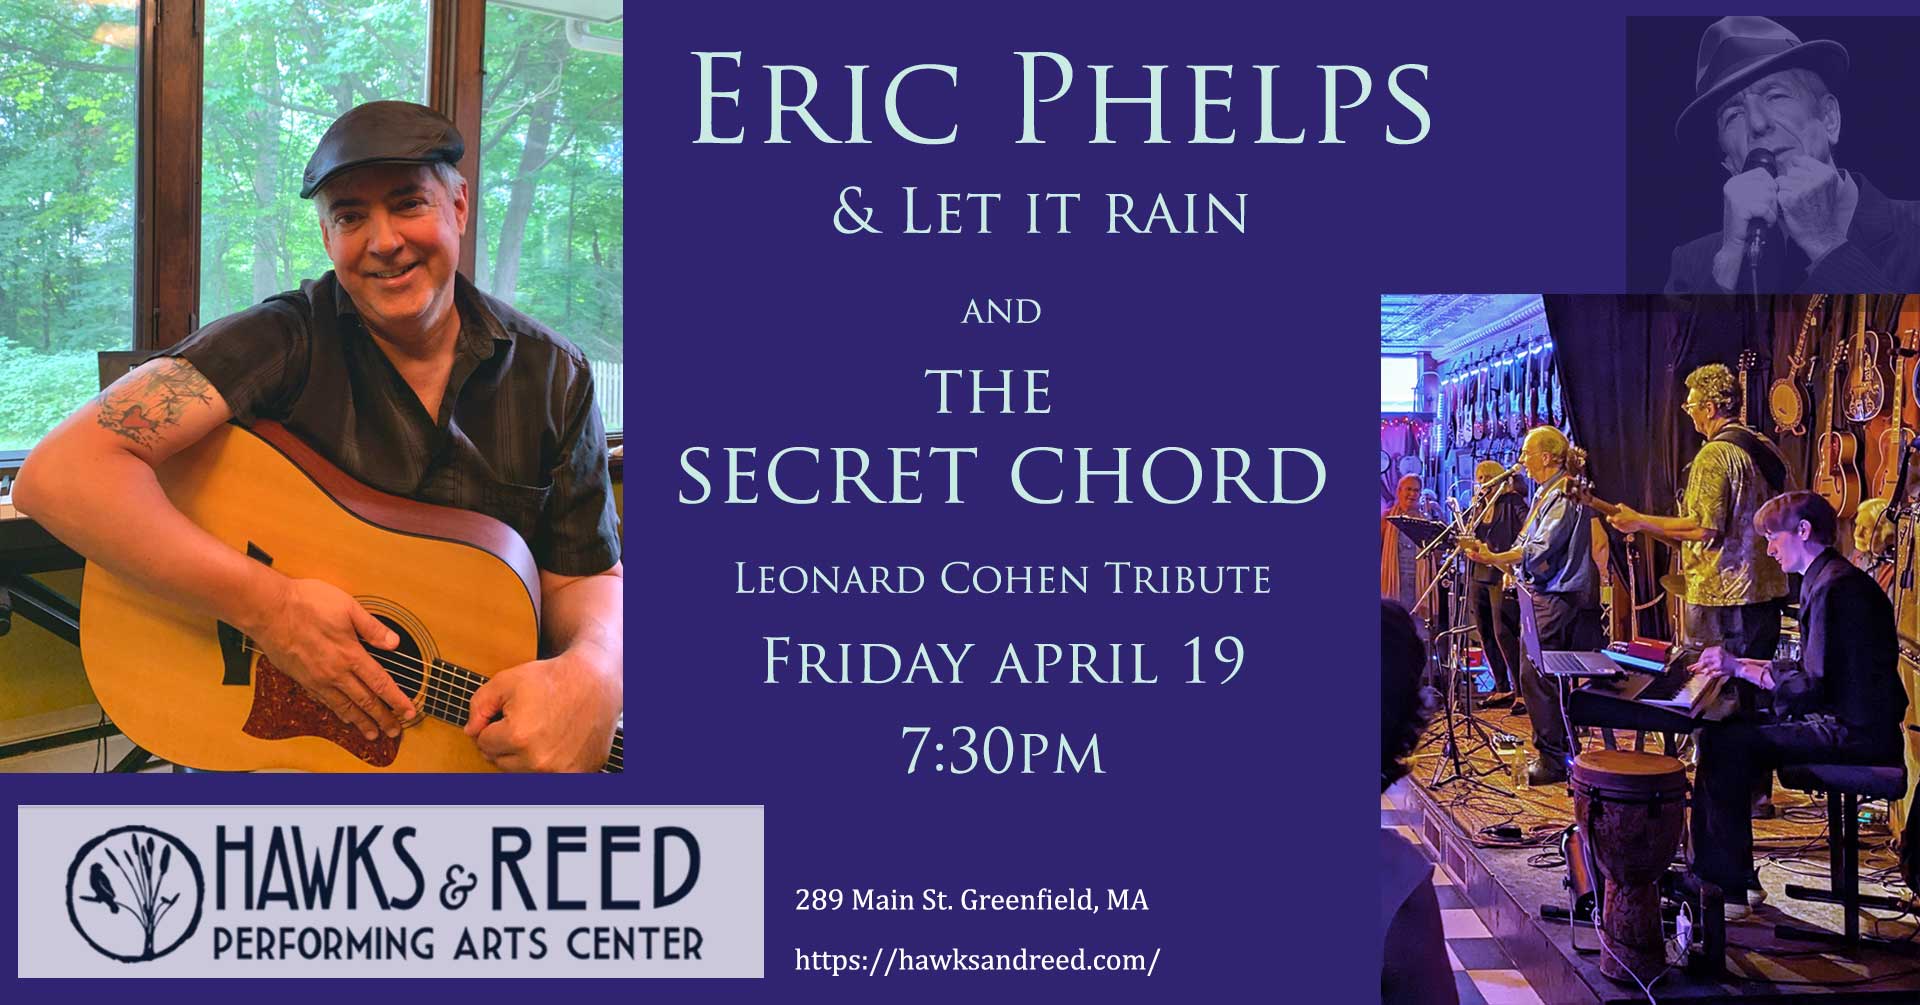 Eric Phelps & Let it Rain//The Secret Chord Band at Hawks & Reed